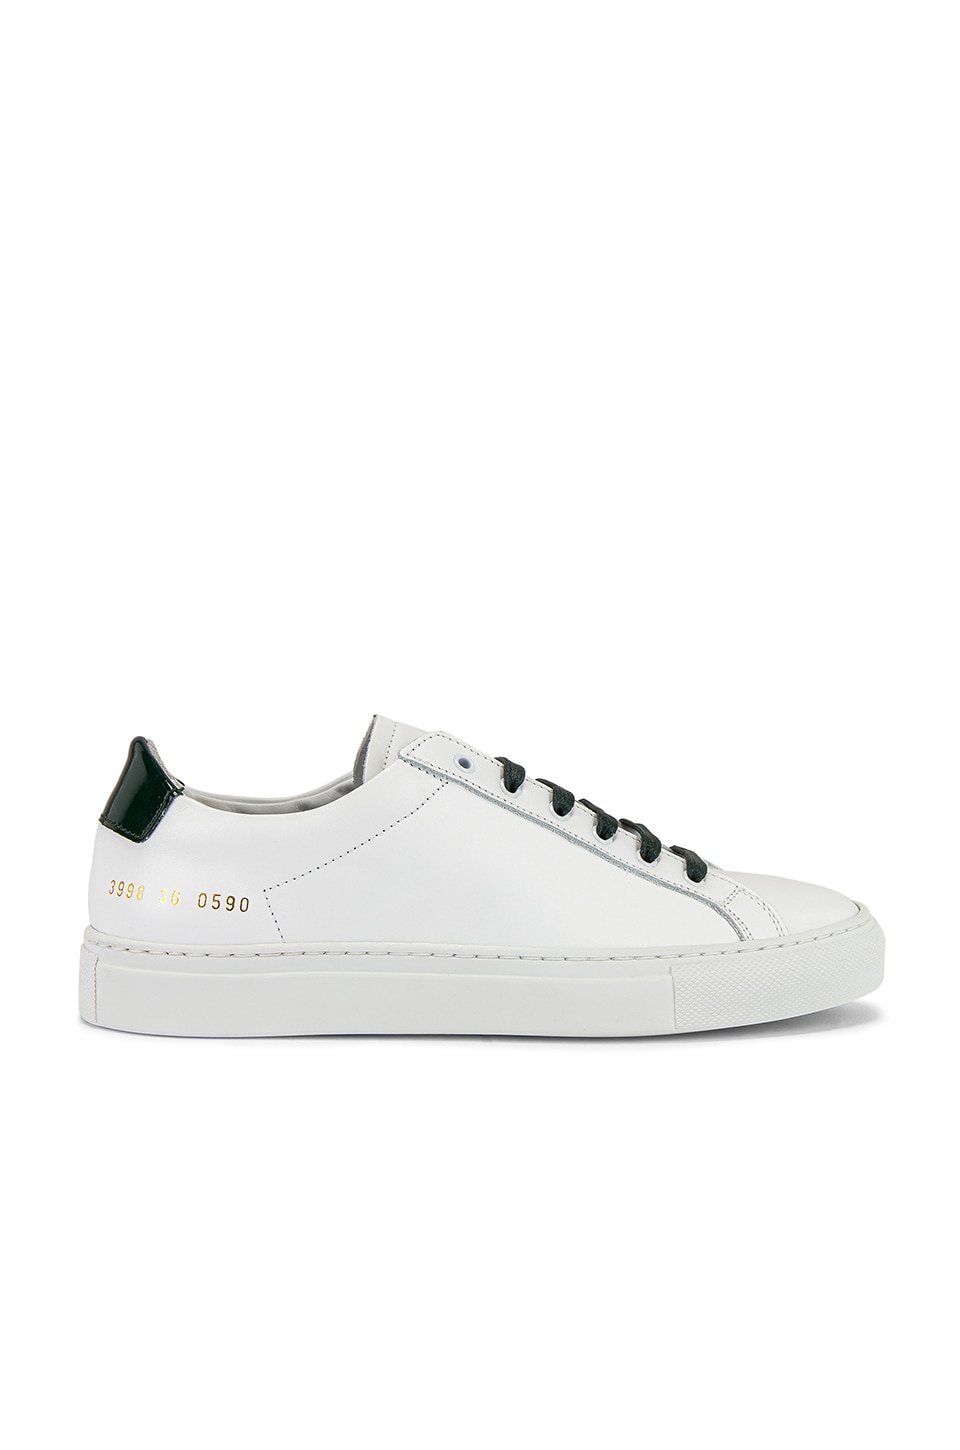 Common Projects Retro Low Glossy 